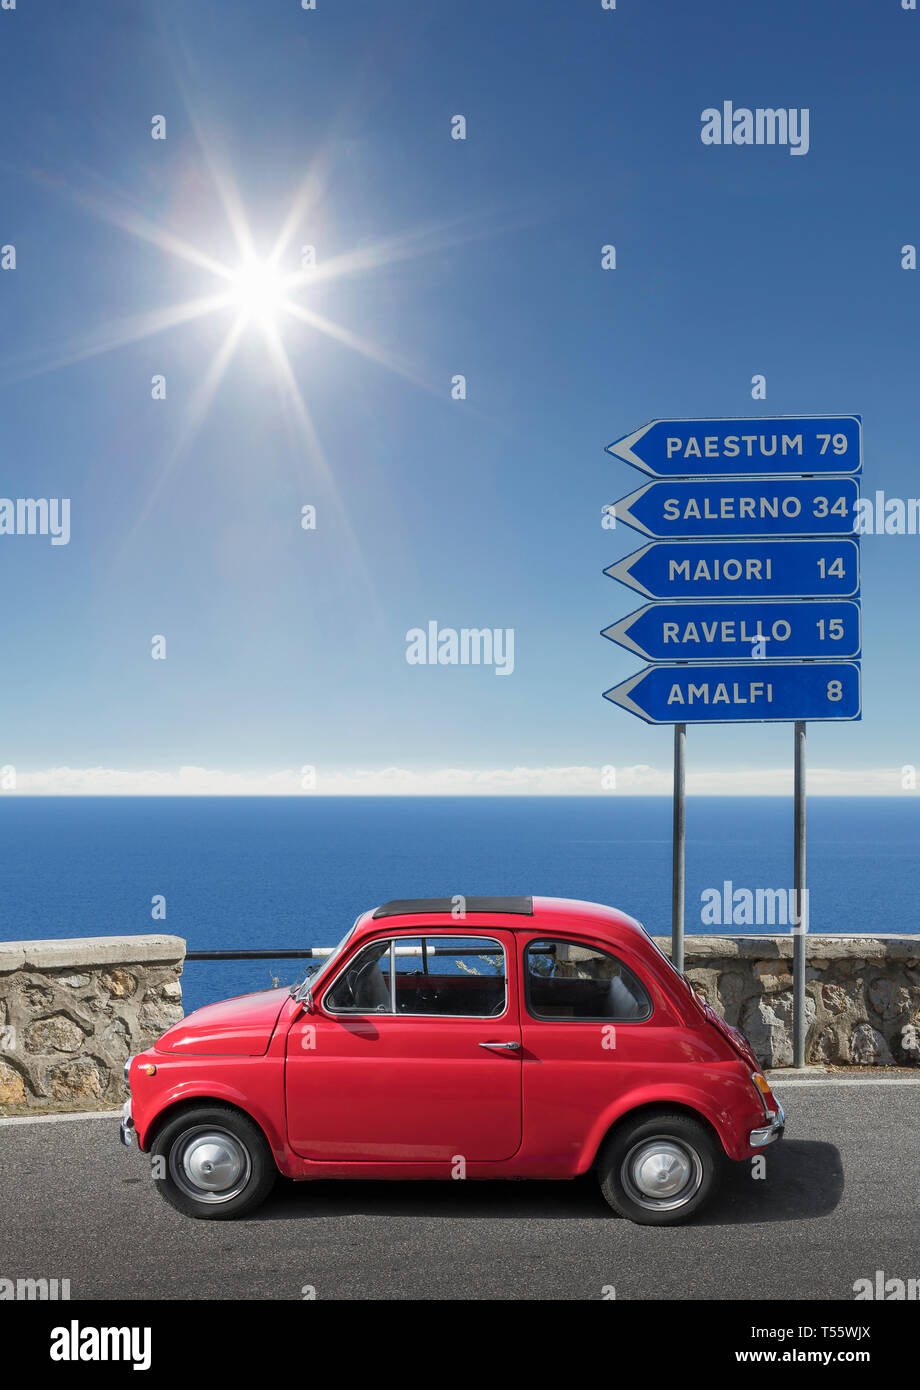 Red car by road sign on Amalfi Coast, Italy Stock Photo